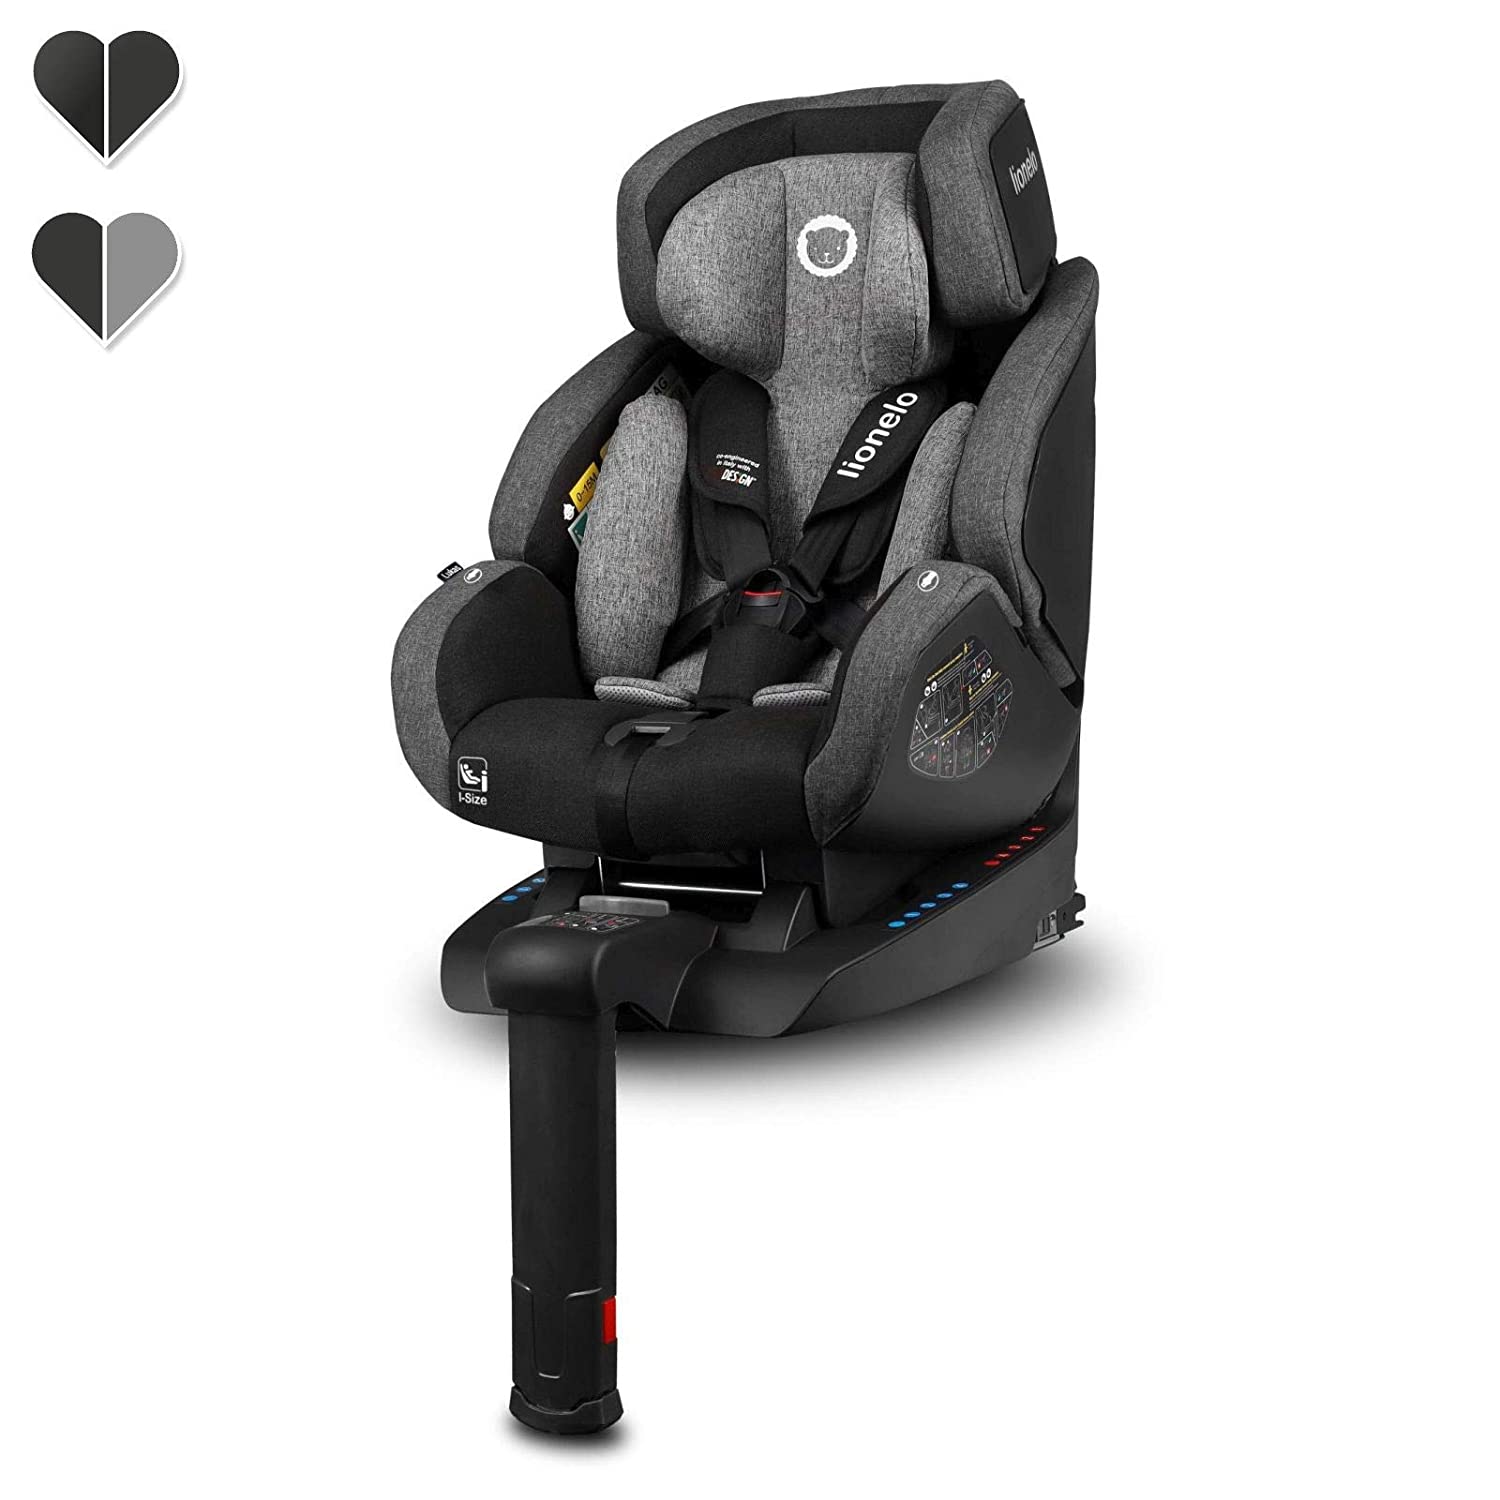 Lionelo Lukas Safety Car Seat 0-18 kg Forwards and Backwards ISOFIX + Support Leg Carbon